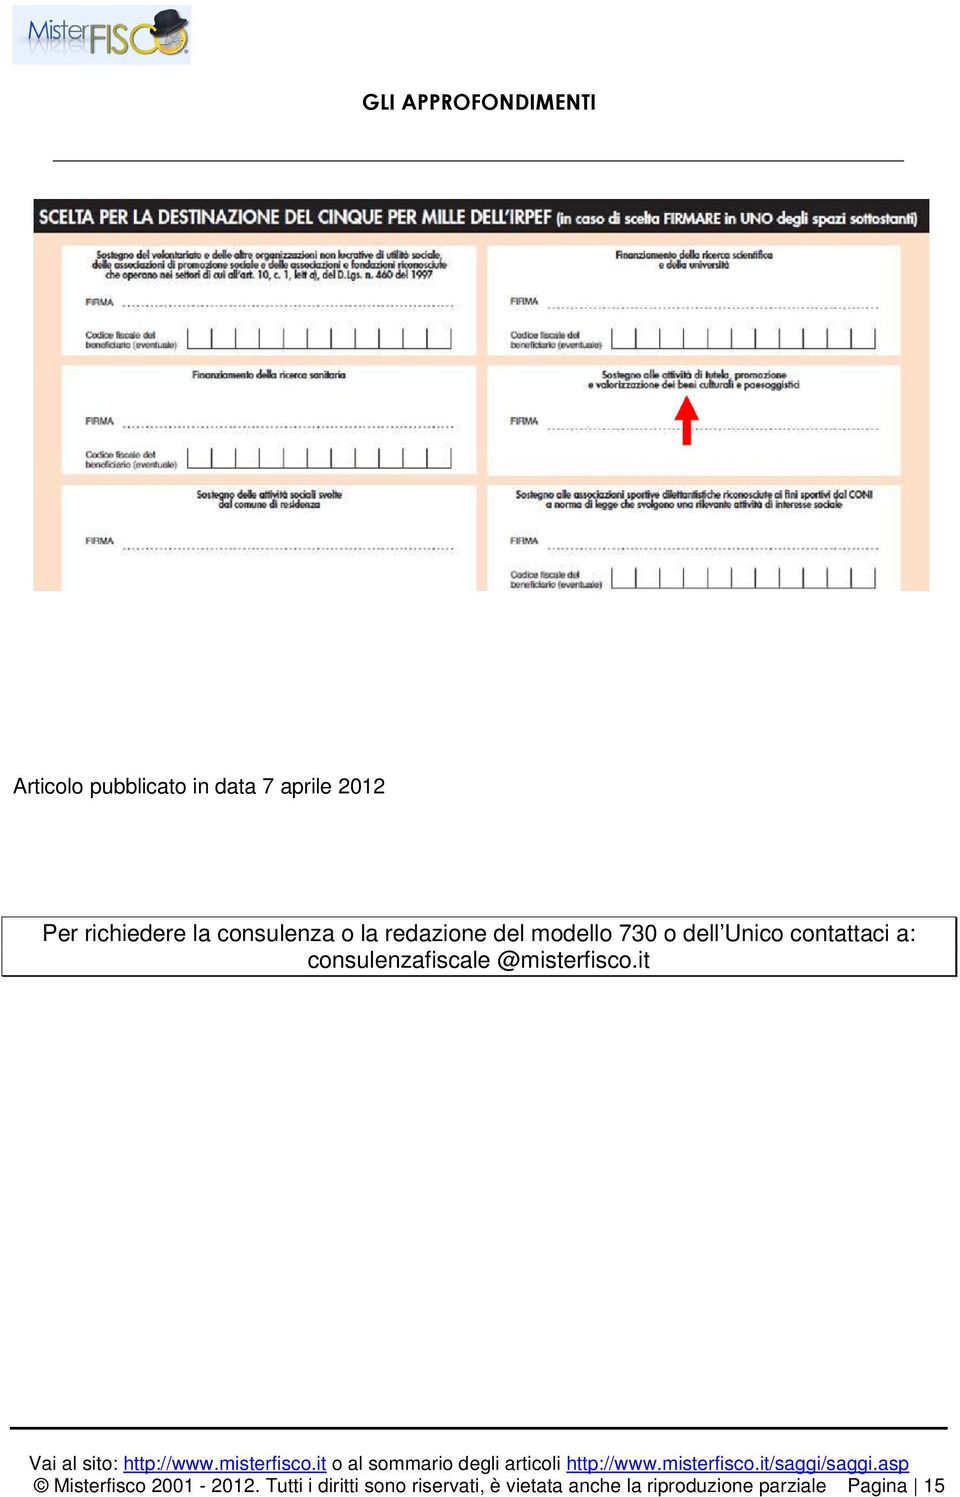 a: consulenzafiscale @misterfisco.it Misterfisco 2001-2012.